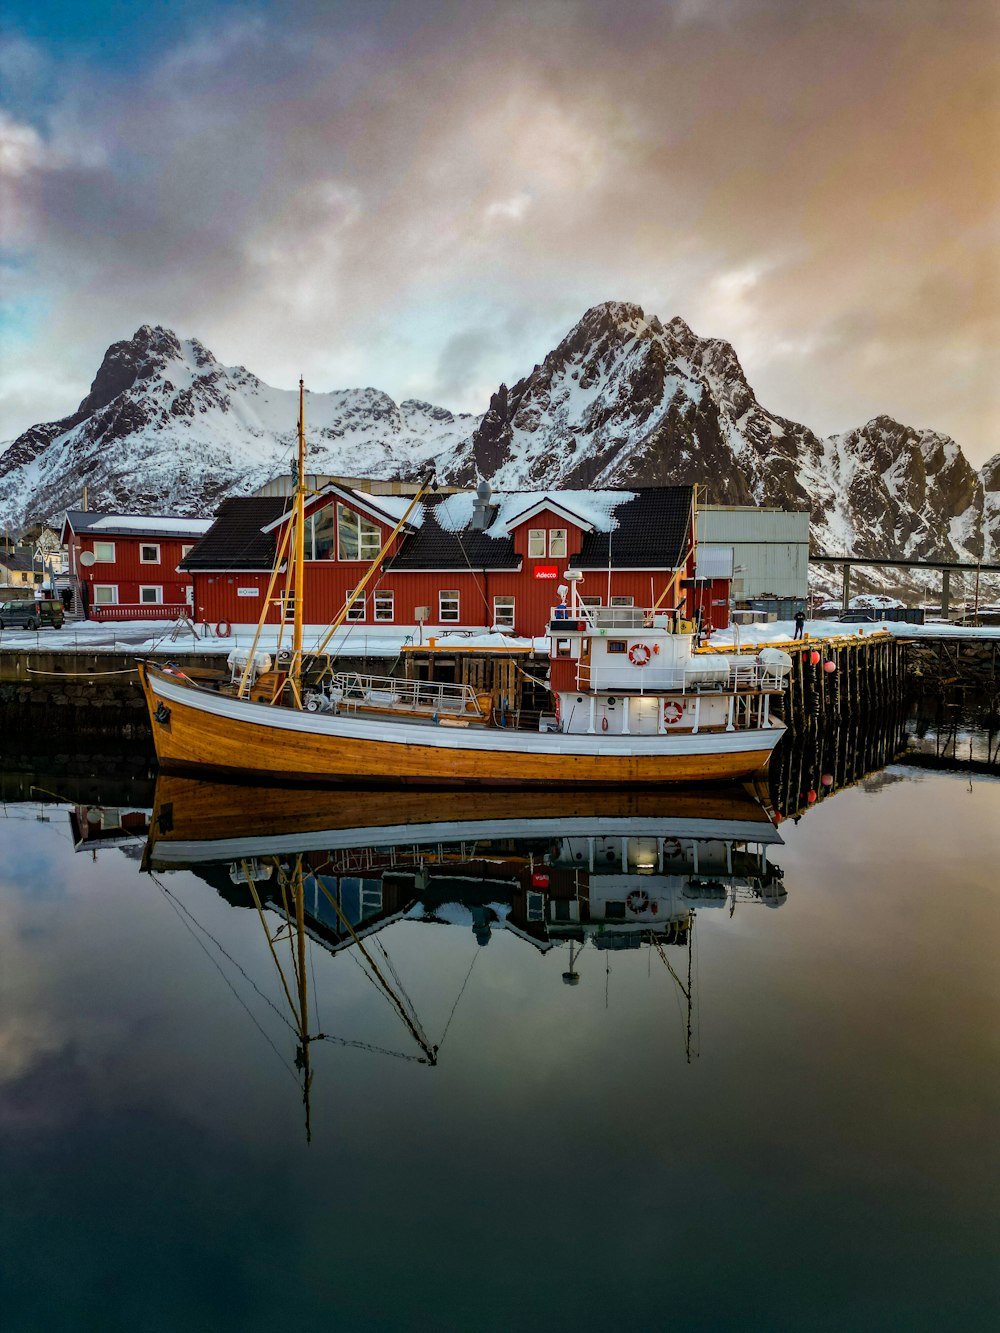 a boat is docked in a harbor with mountains in the background